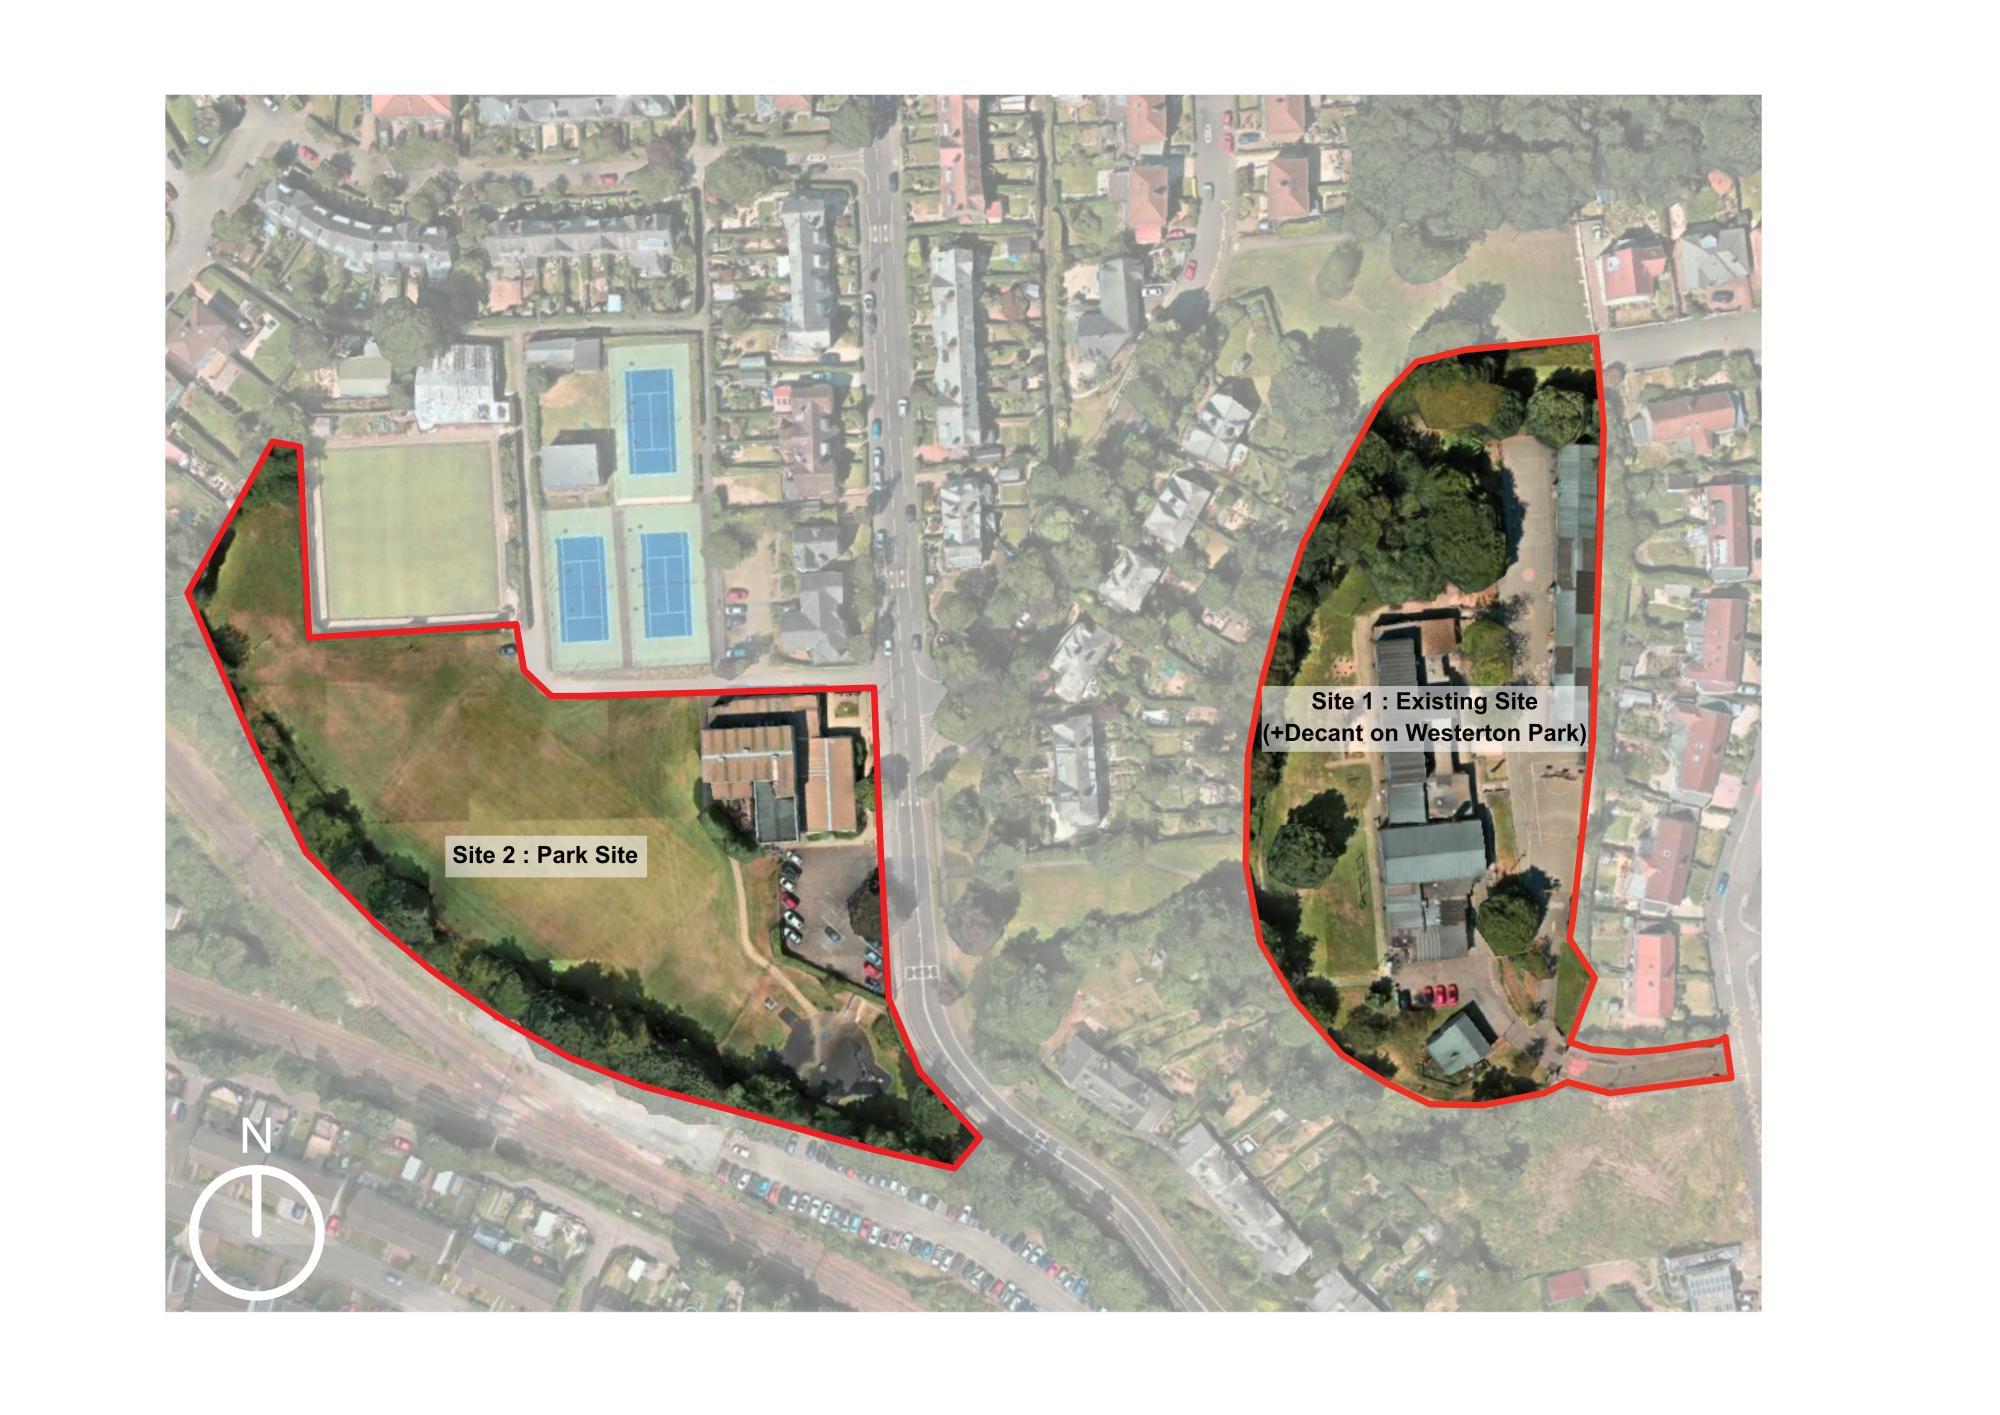 A map of Westerton highlighting the two sites under consideration for the new Westerton Primary School. Site 1 is the existing school site. Site 2 is the Westerton Park site.